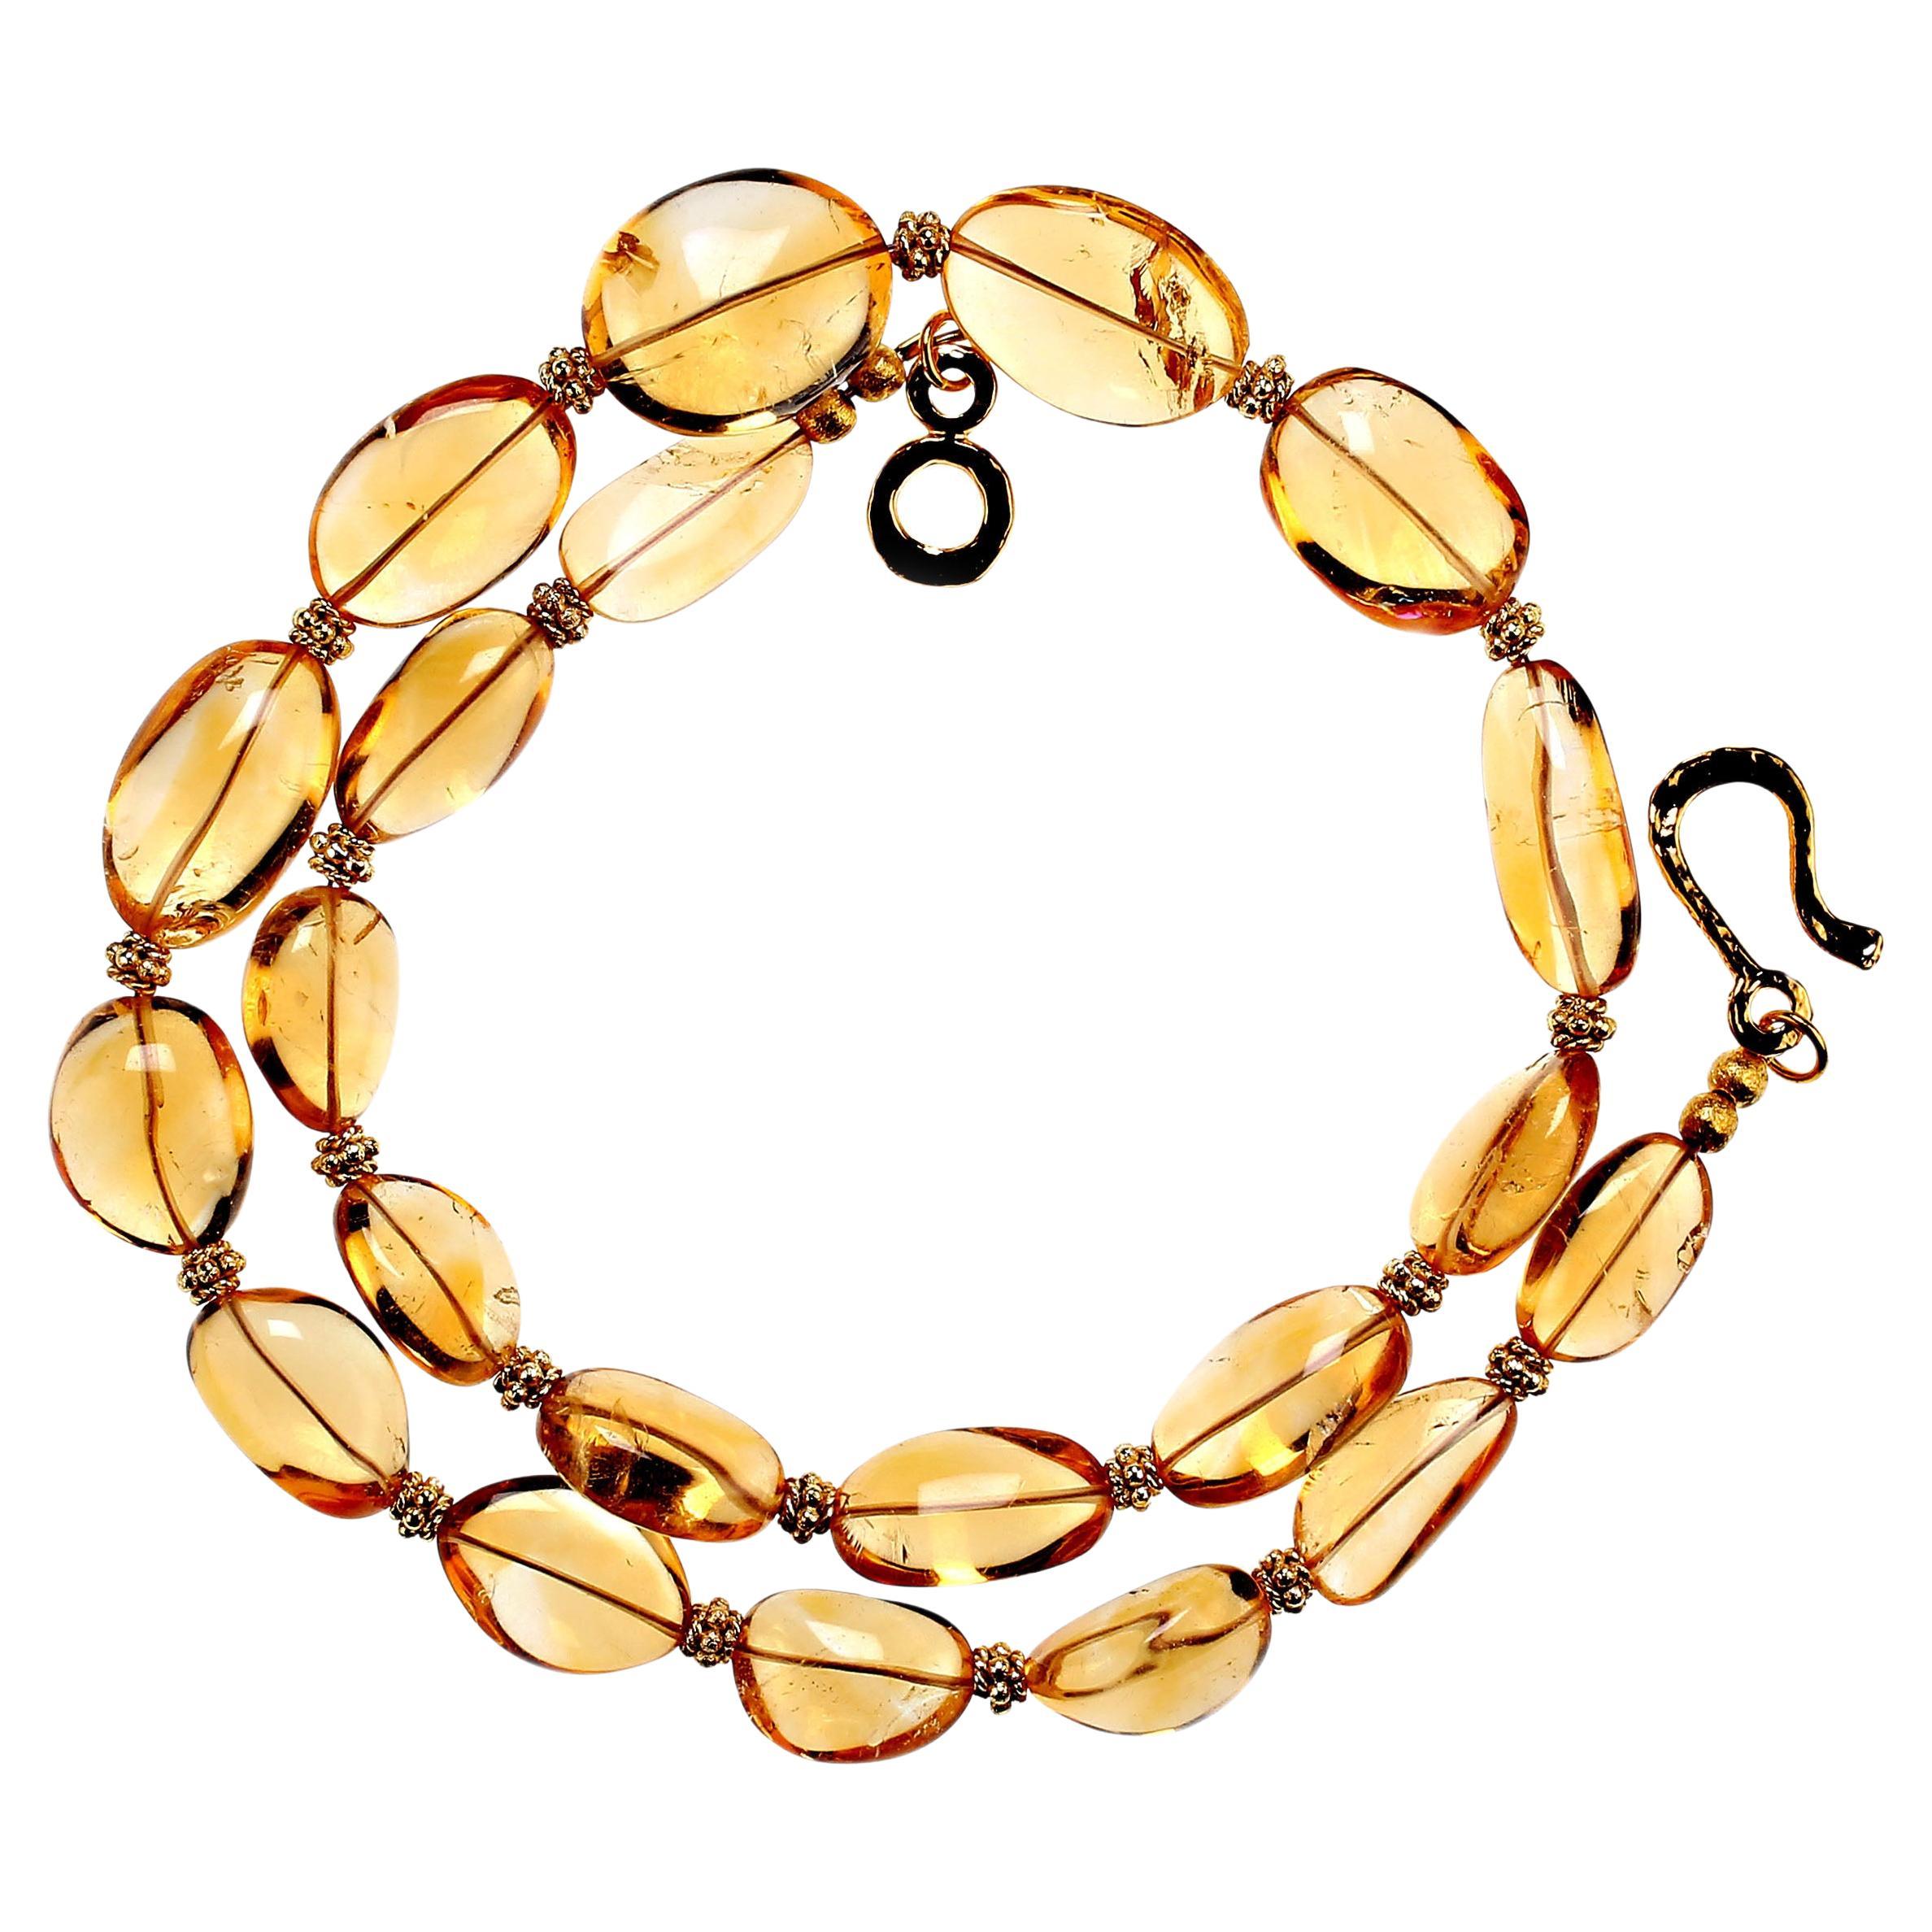 Bead Warm and Glowing Citrine nuggets with goldy accents 21 inch necklace Great Gift! For Sale